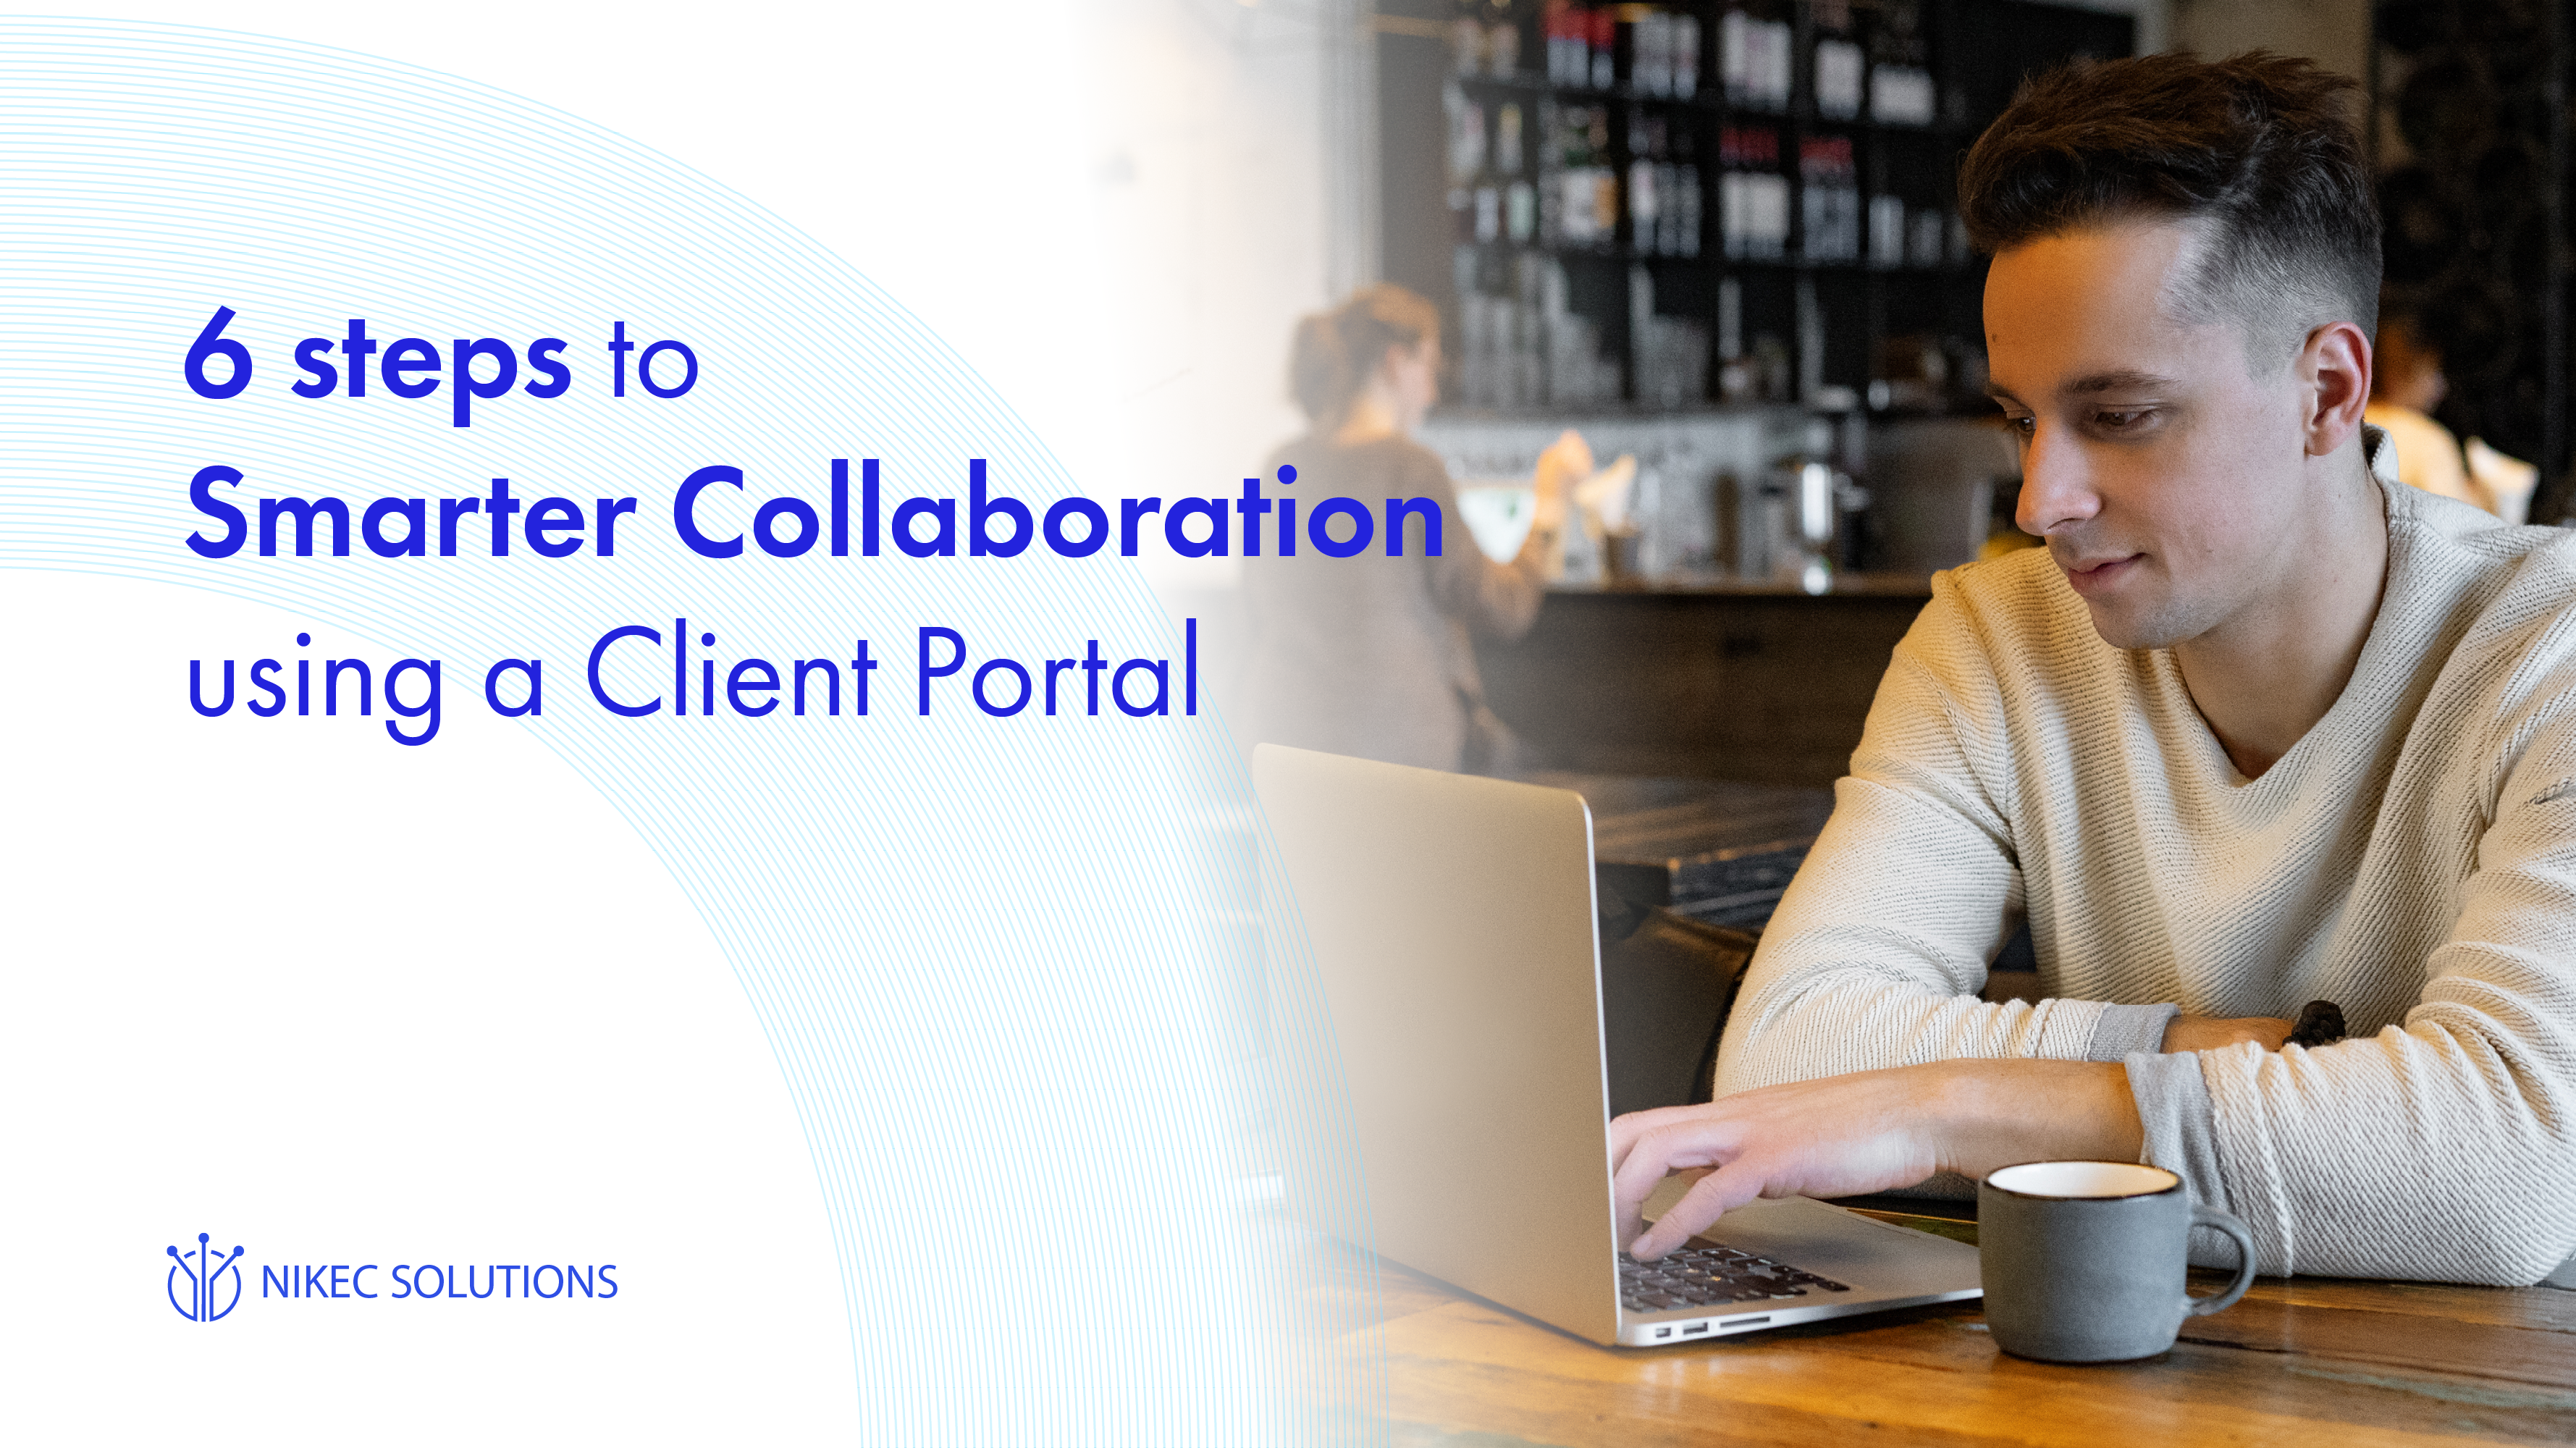 6 steps to Smarter Collaboration using a Client Portal